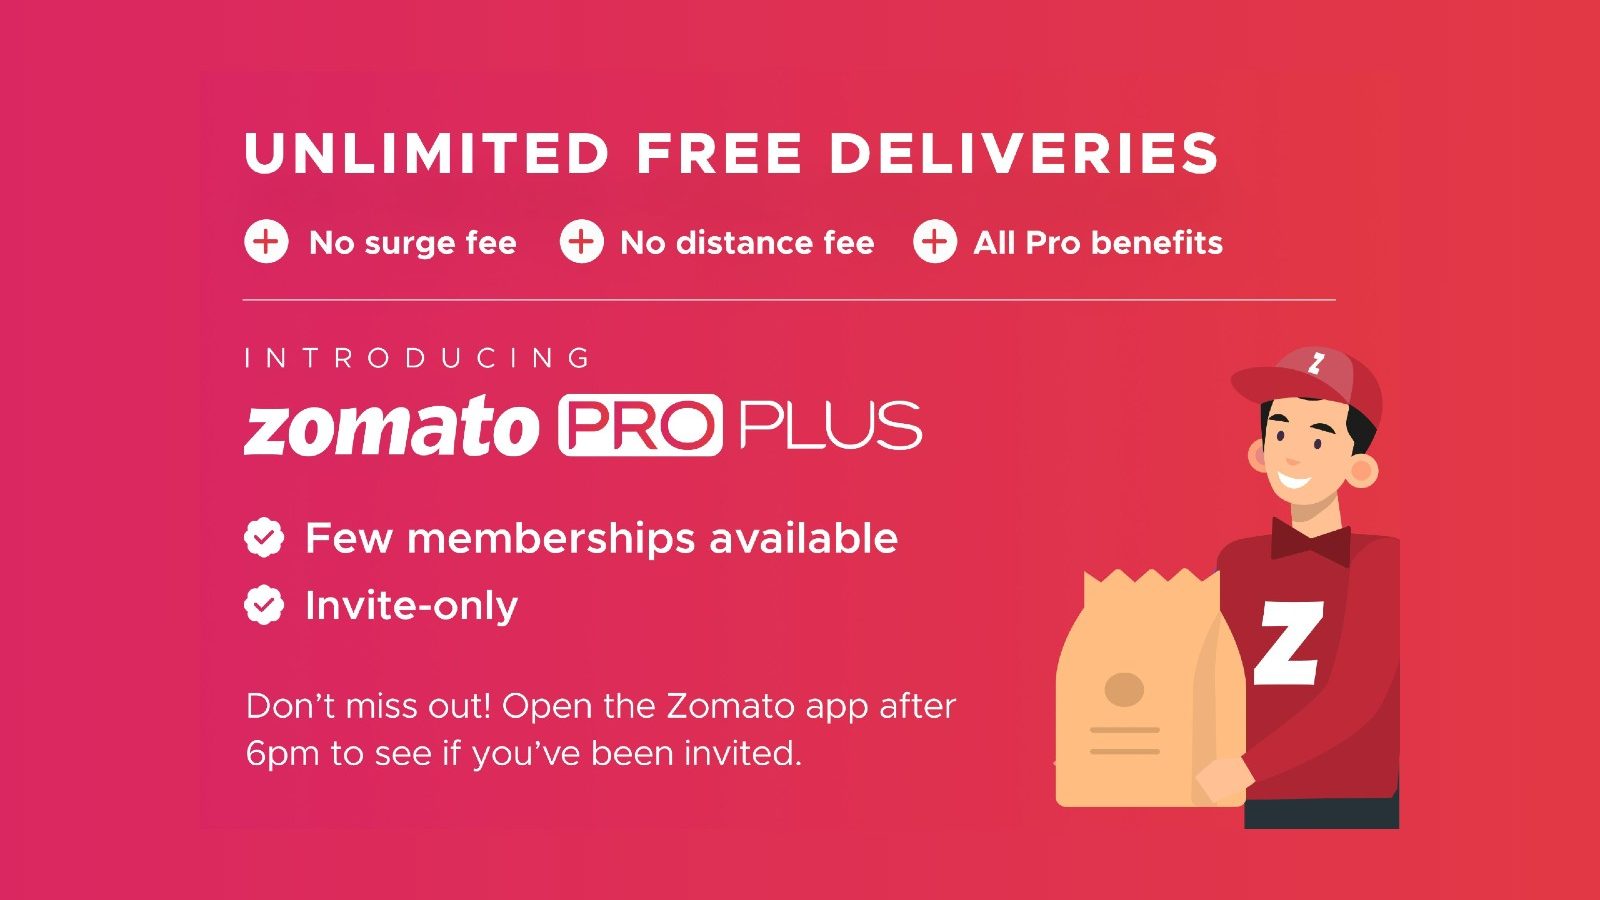 Zomato Pro Plus Limited Membership Offers Unlimited ‘Free’ Deliveries: How it Works